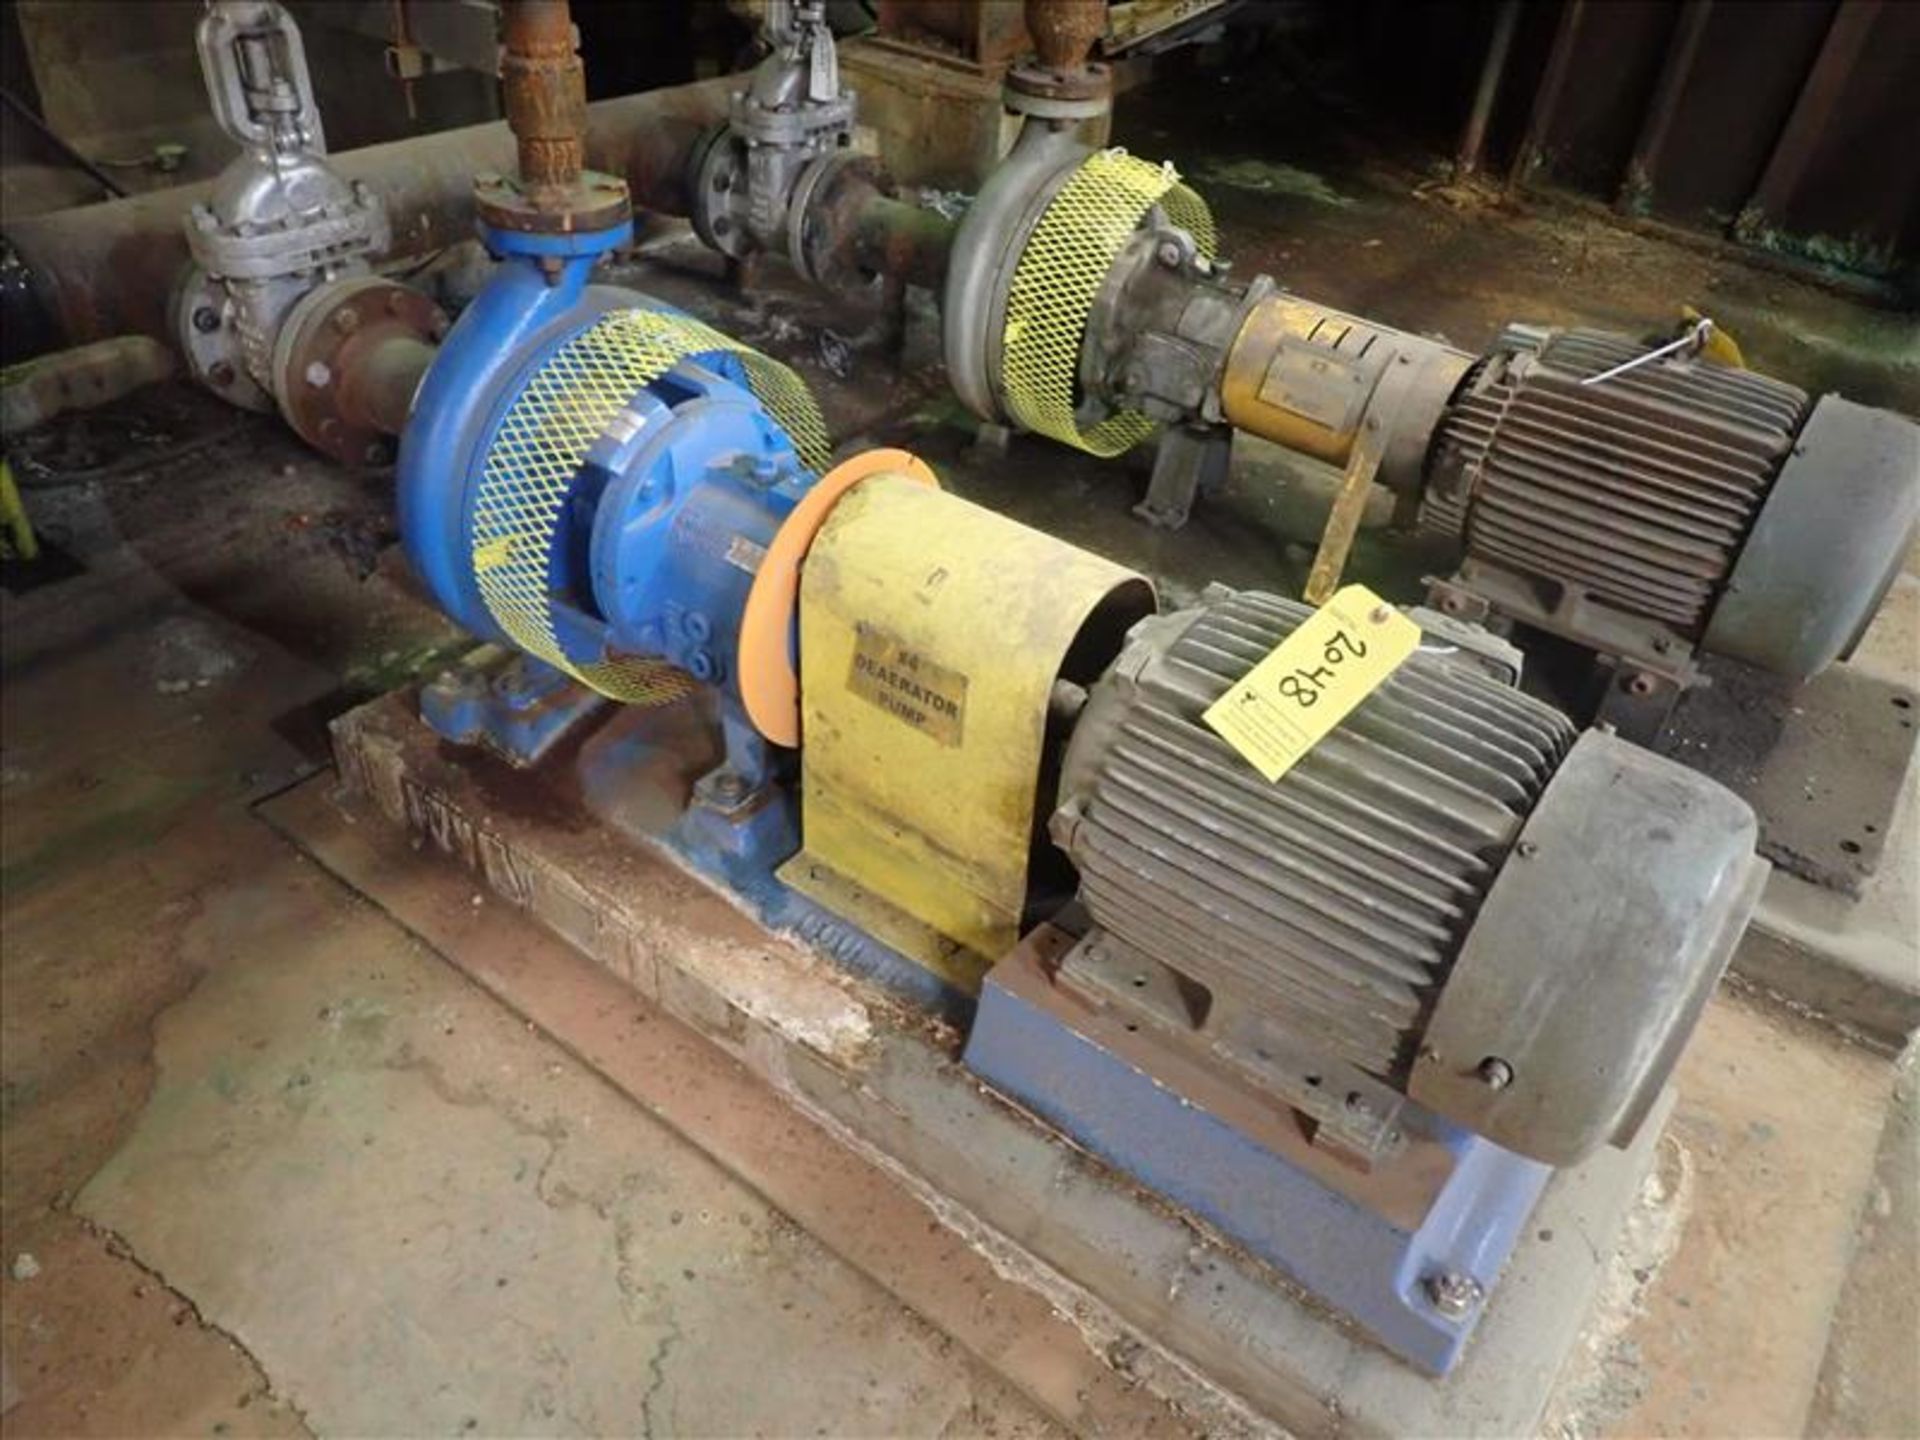 Goulds centrifugal pump, mod. 3196, size 2x3-13, 20 hp (Tag 7048 Loc Power House)